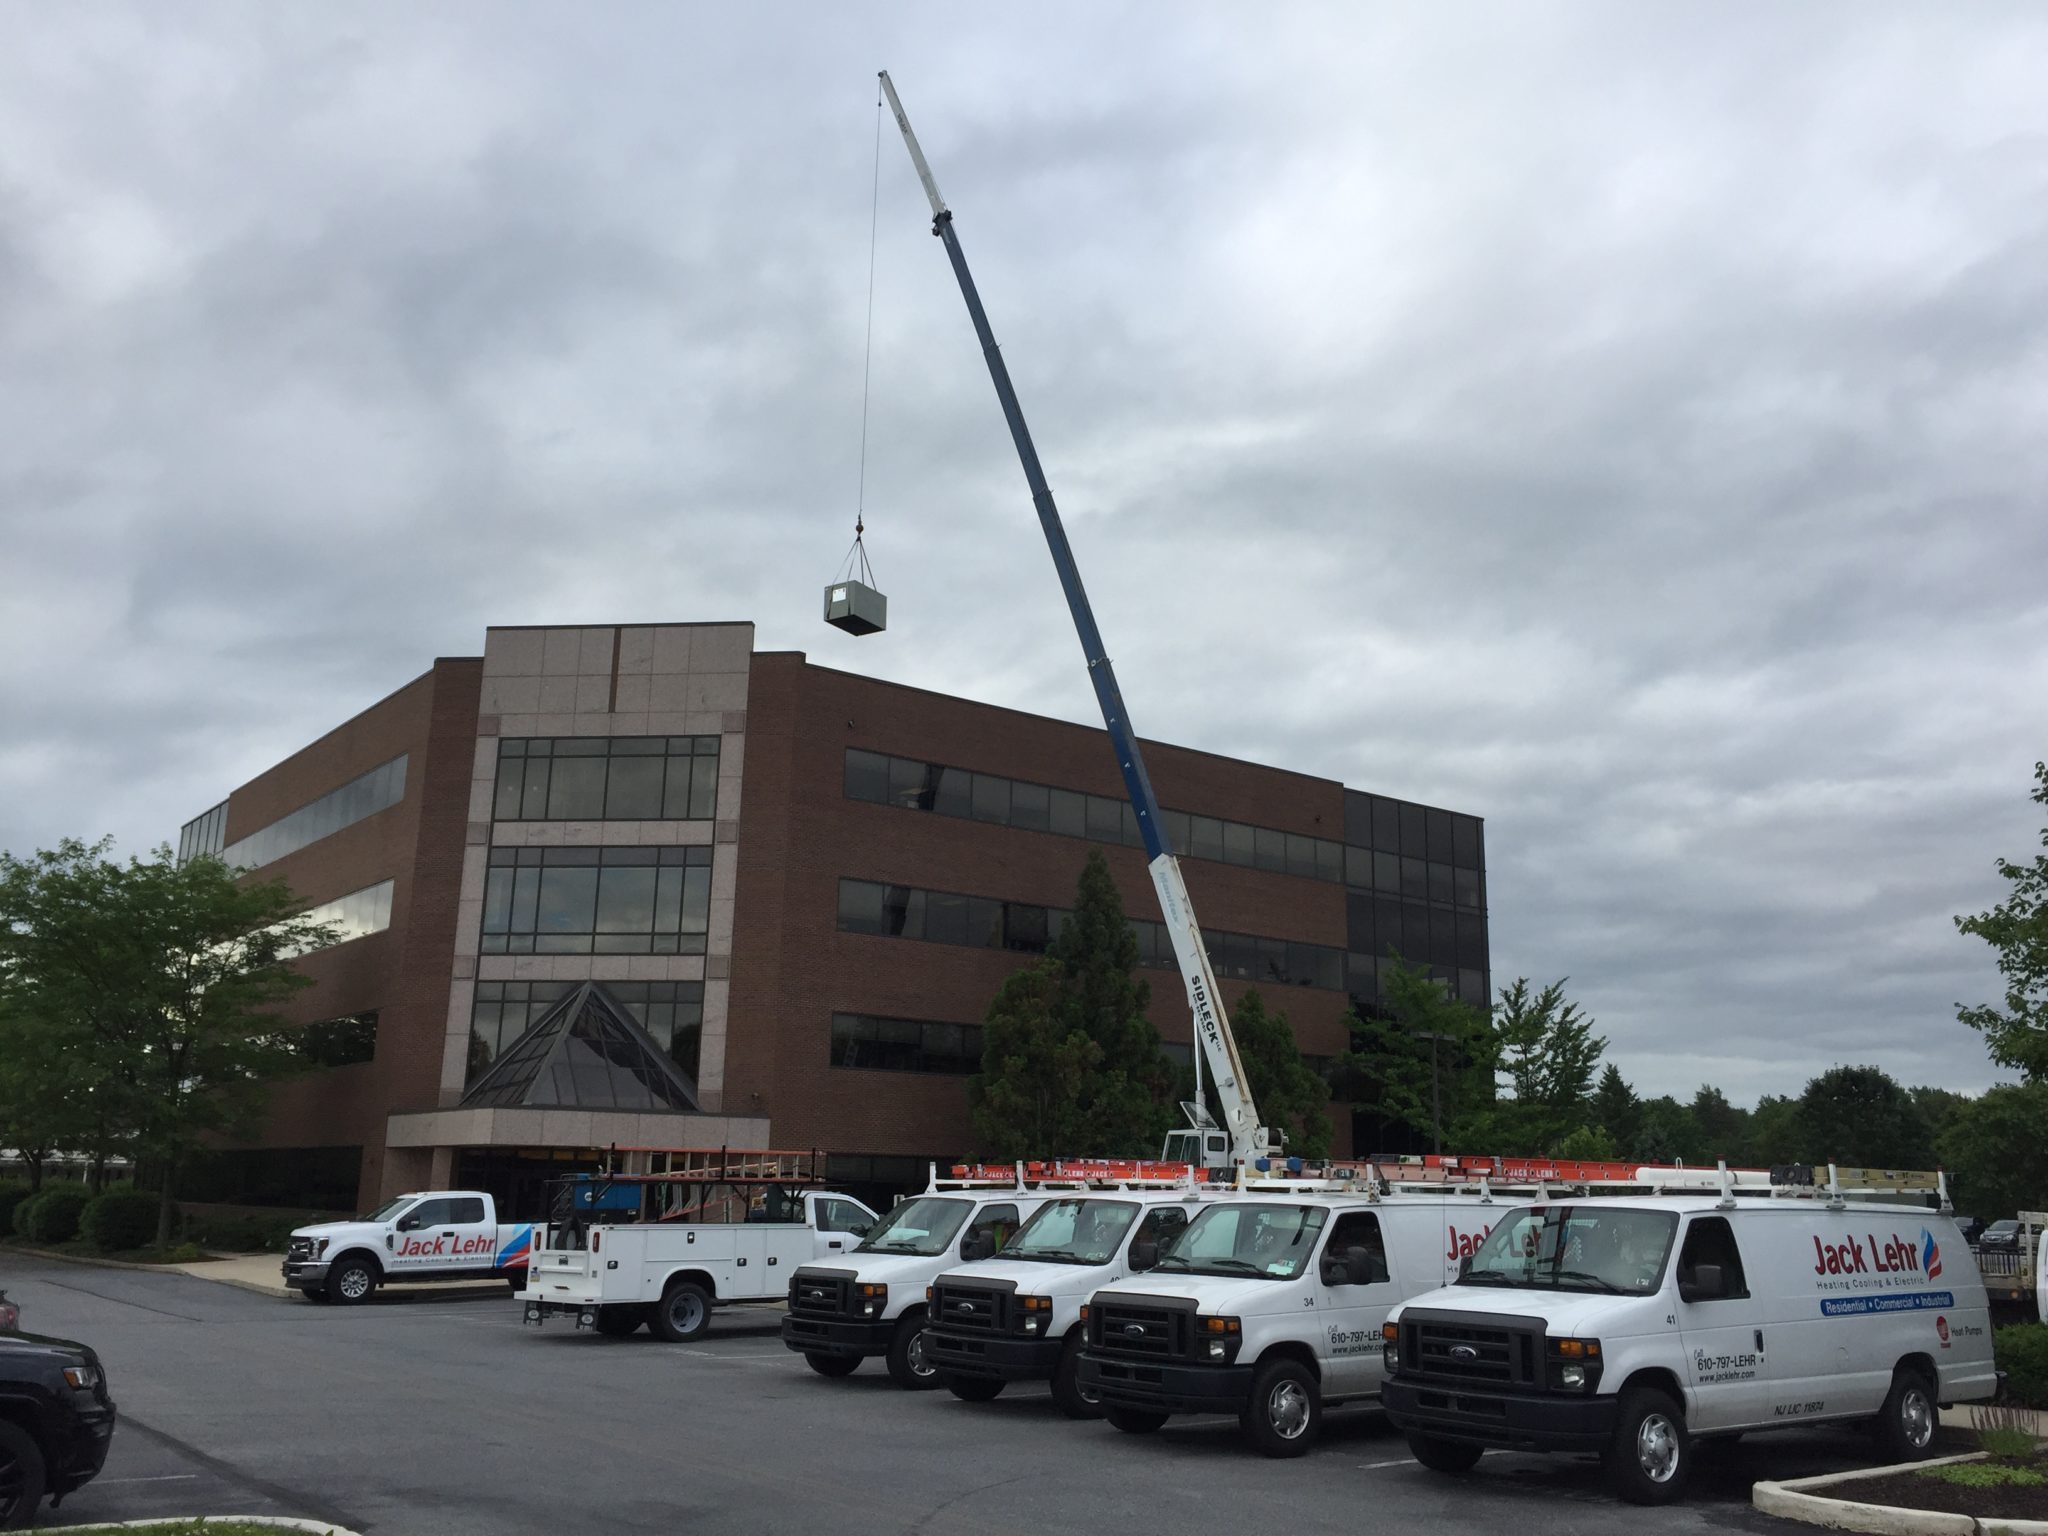 Commercial HVAC installation in Allentown, PA. Crane lifting HVAC system onto a large building's roof. 